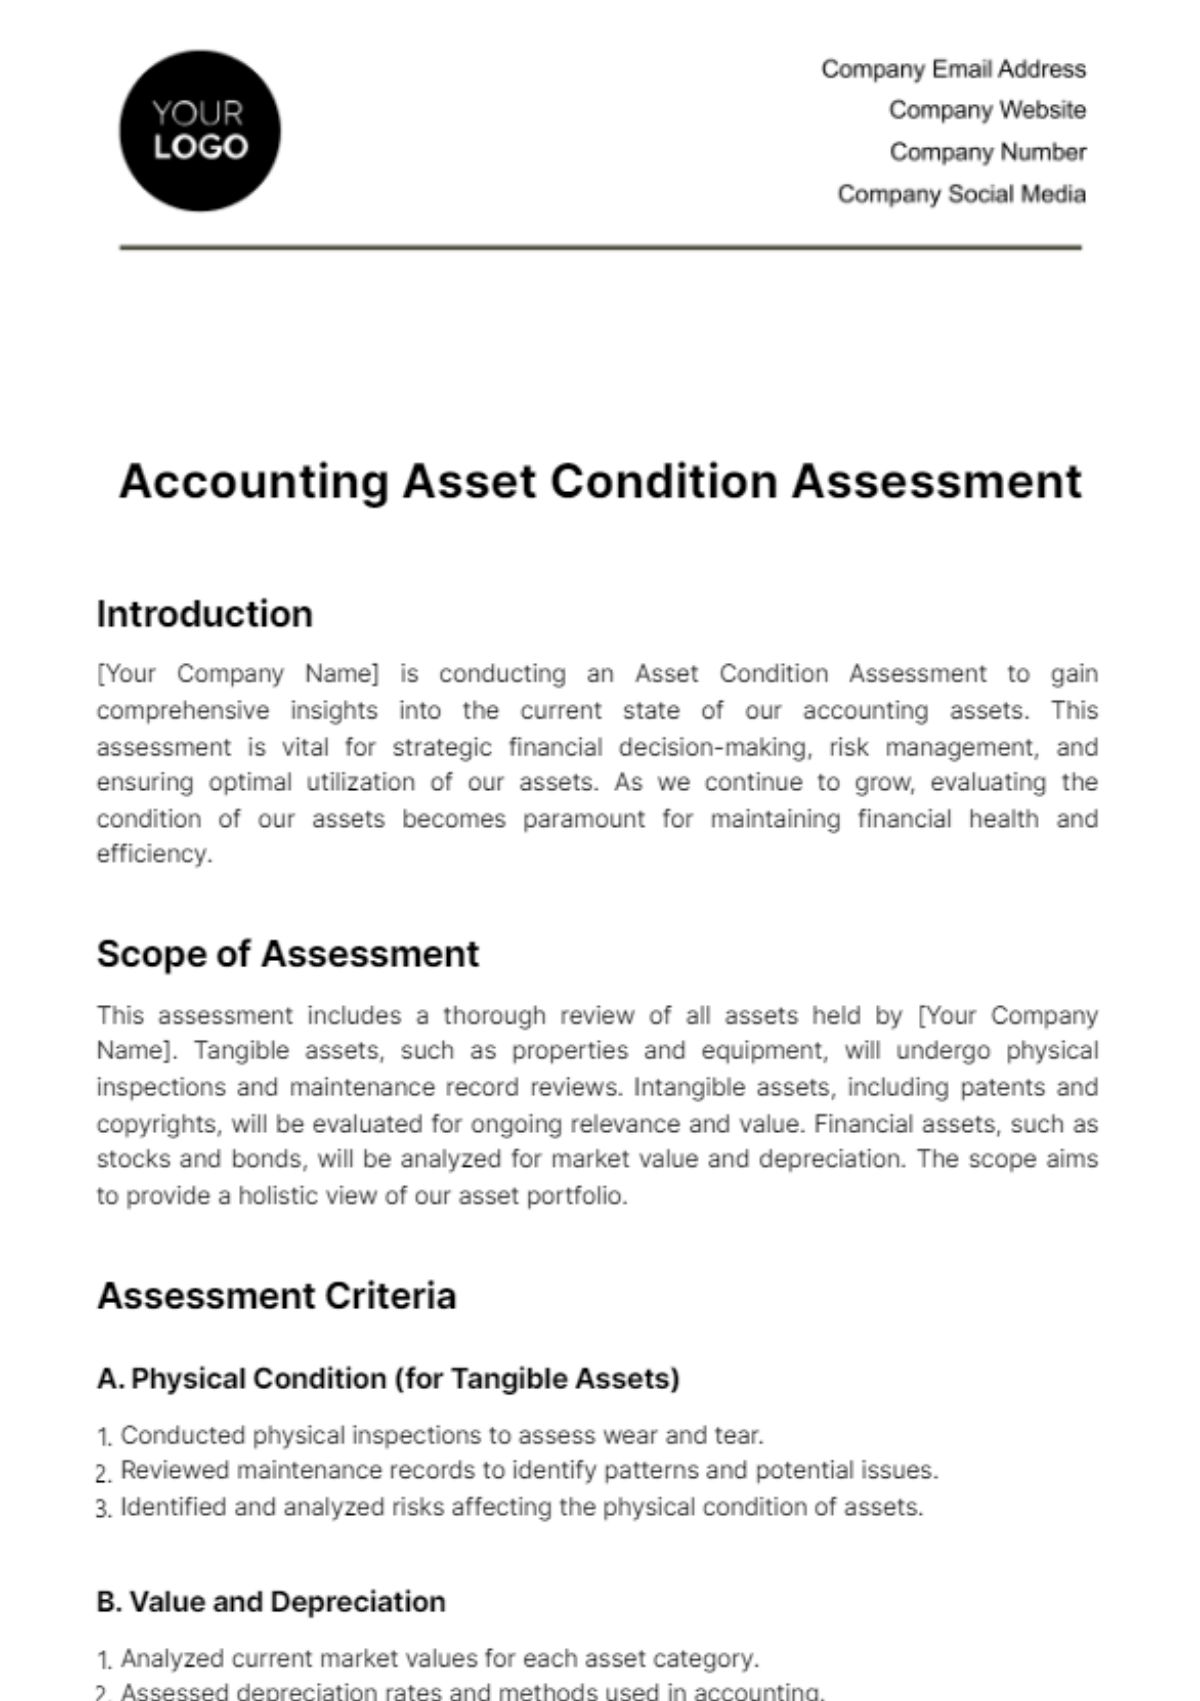 Accounting Asset Condition Assessment Template